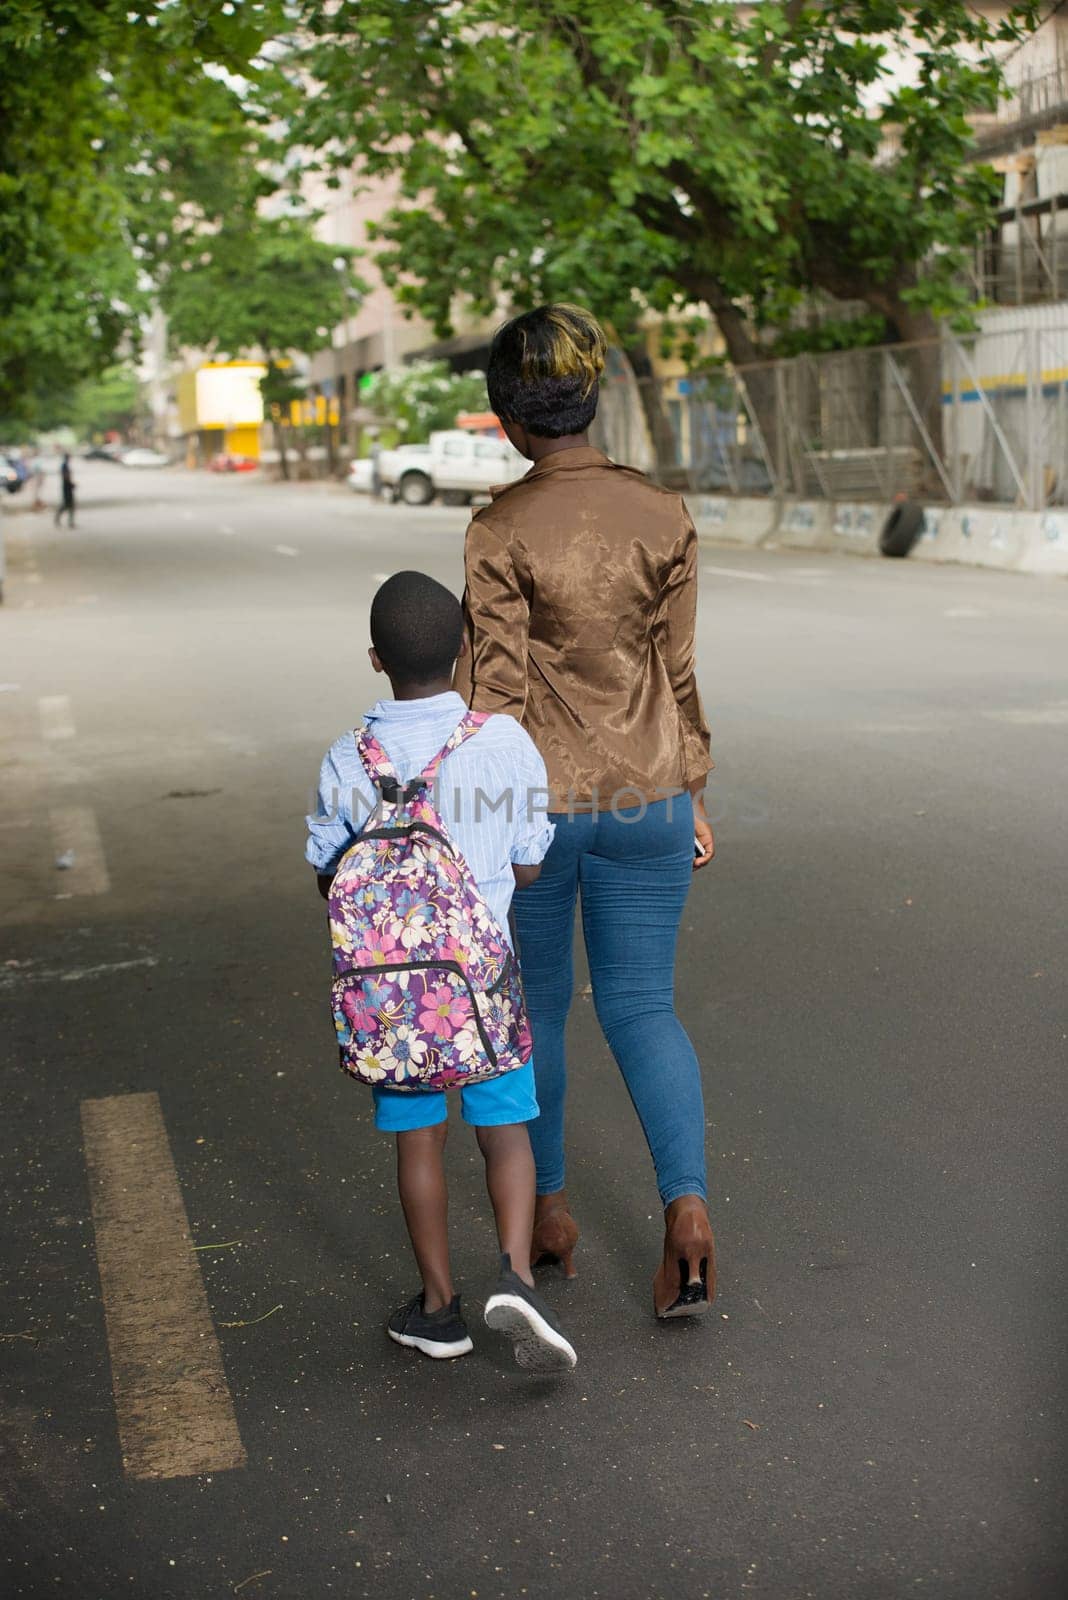 woman and son on the way to school. Child going back to school. Start of the new school year after the summer holidays. little boy with backpack returns to school accompanied by his mother. Beginning of the course